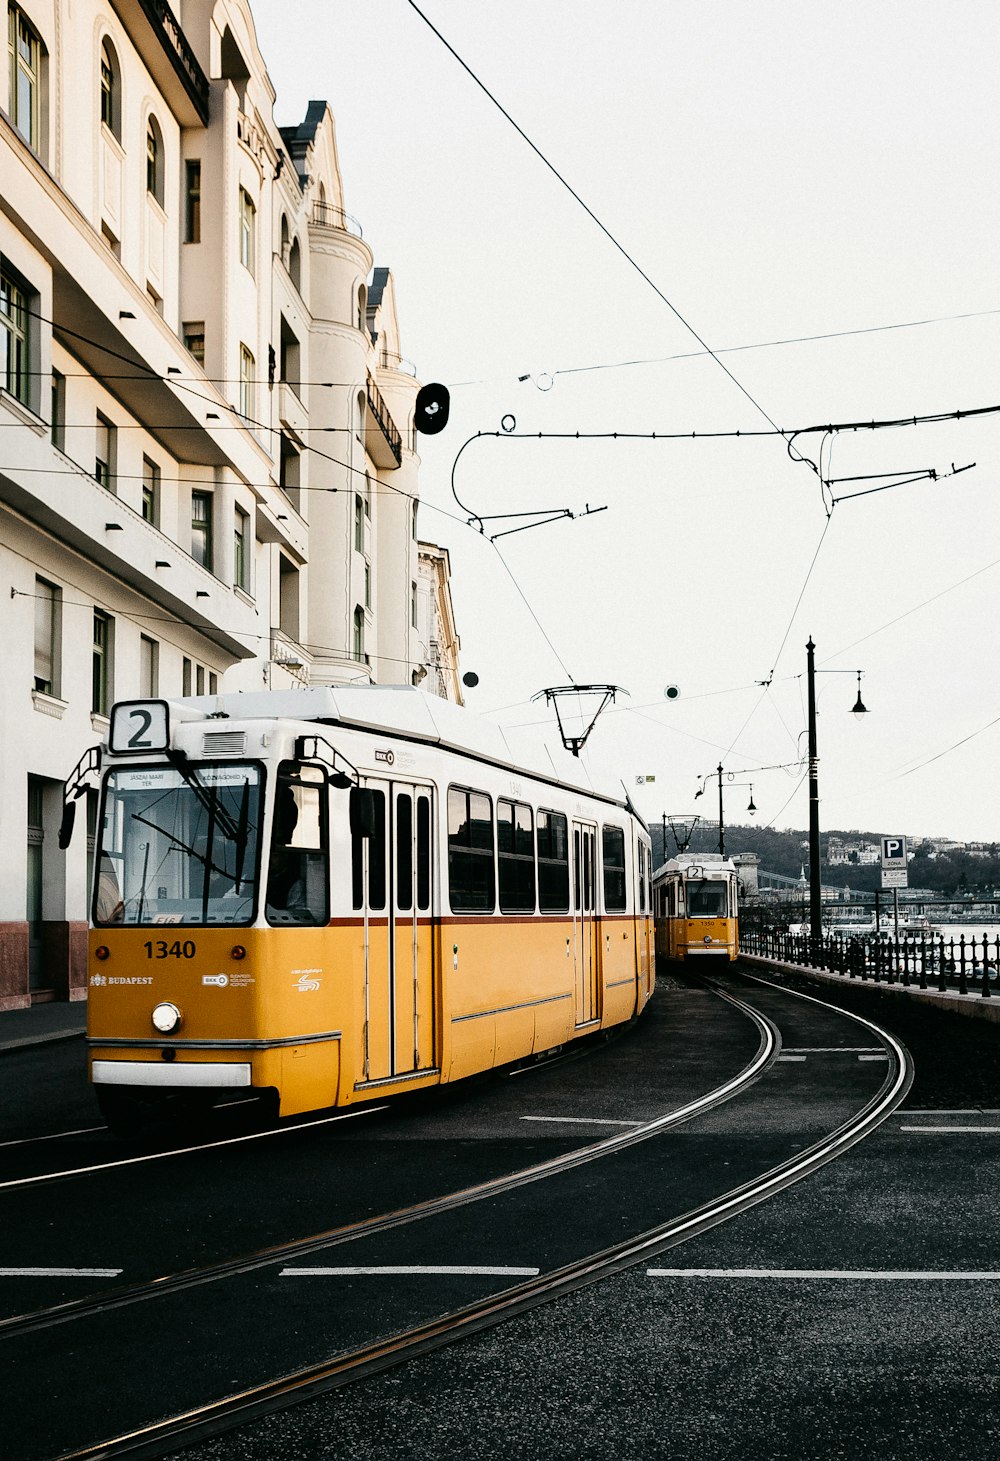 yellow and white tram on the street during daytime